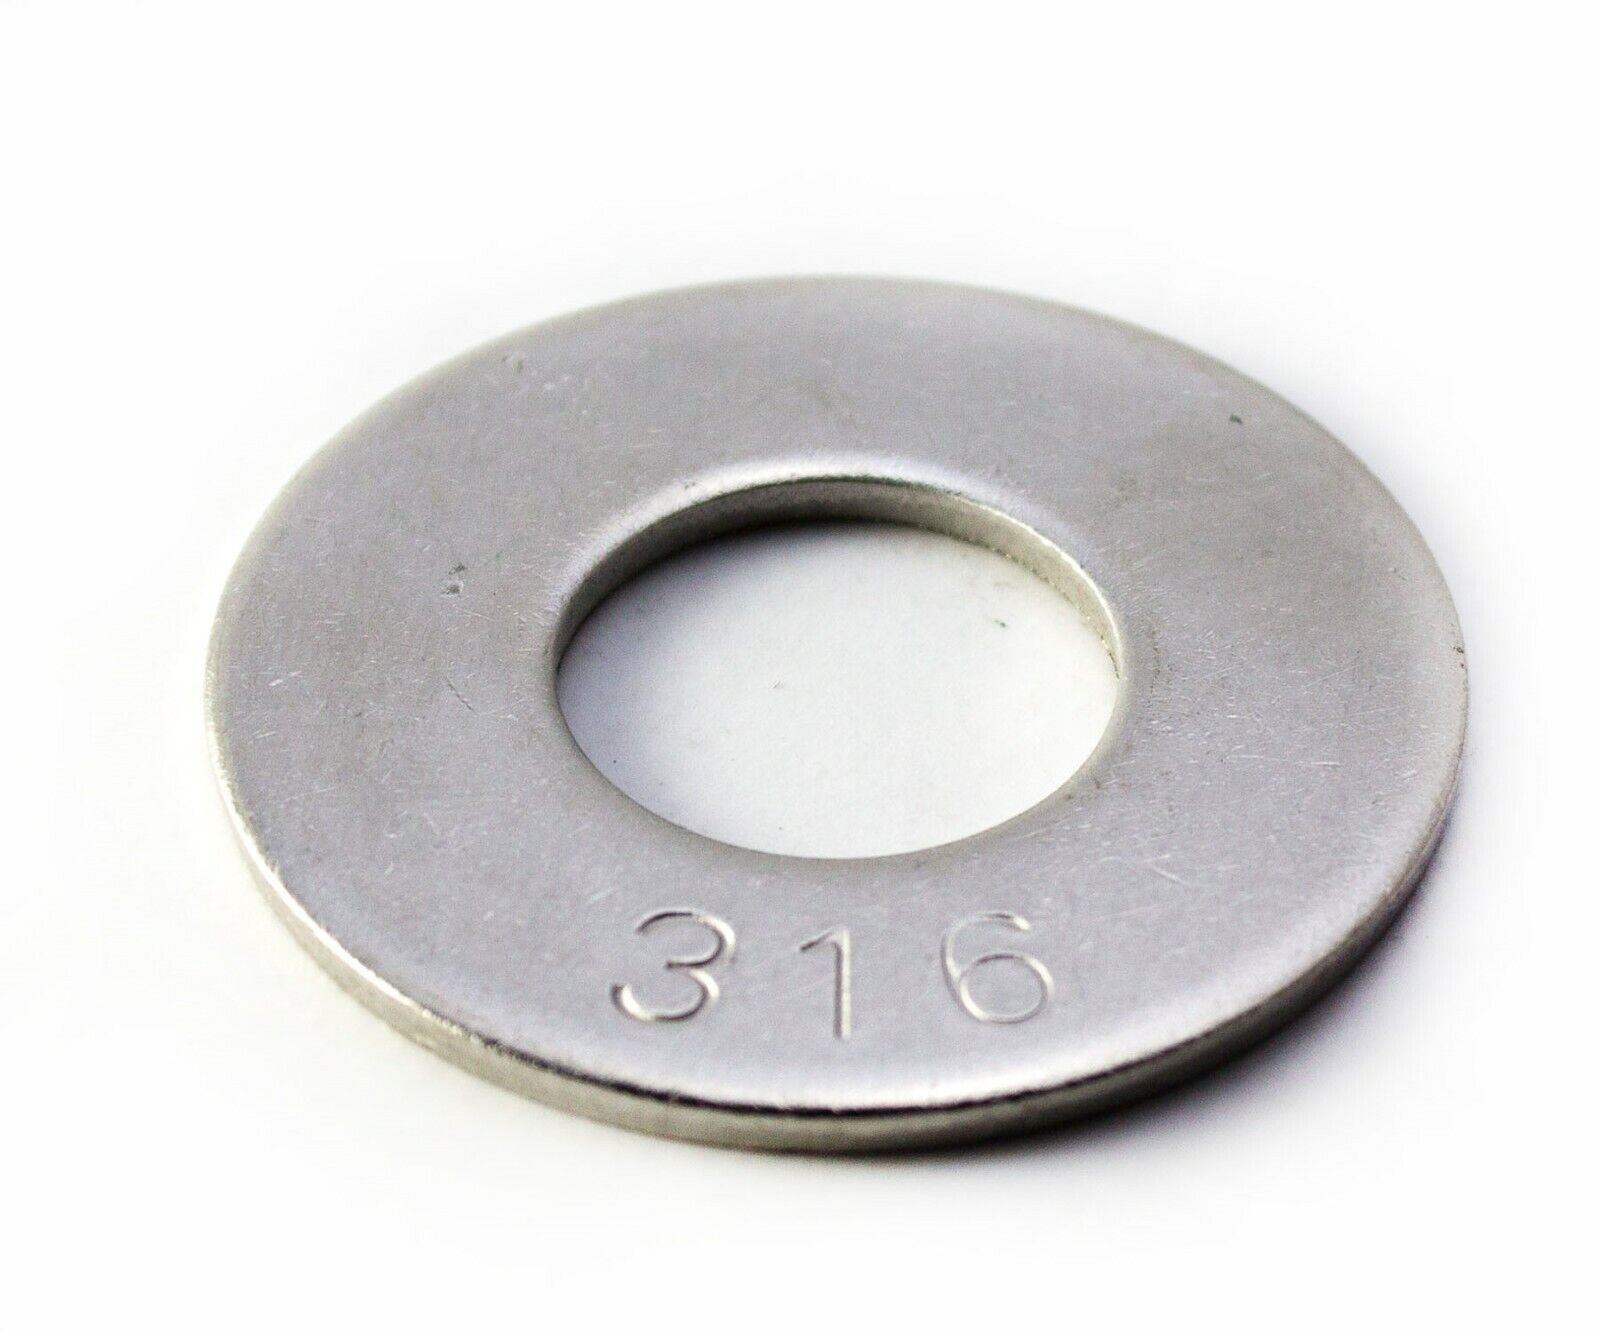 Flat Washer SAE 316 Stainless Steel, choose size (#10, 1/4, 5/16, 3/8, 1/2)